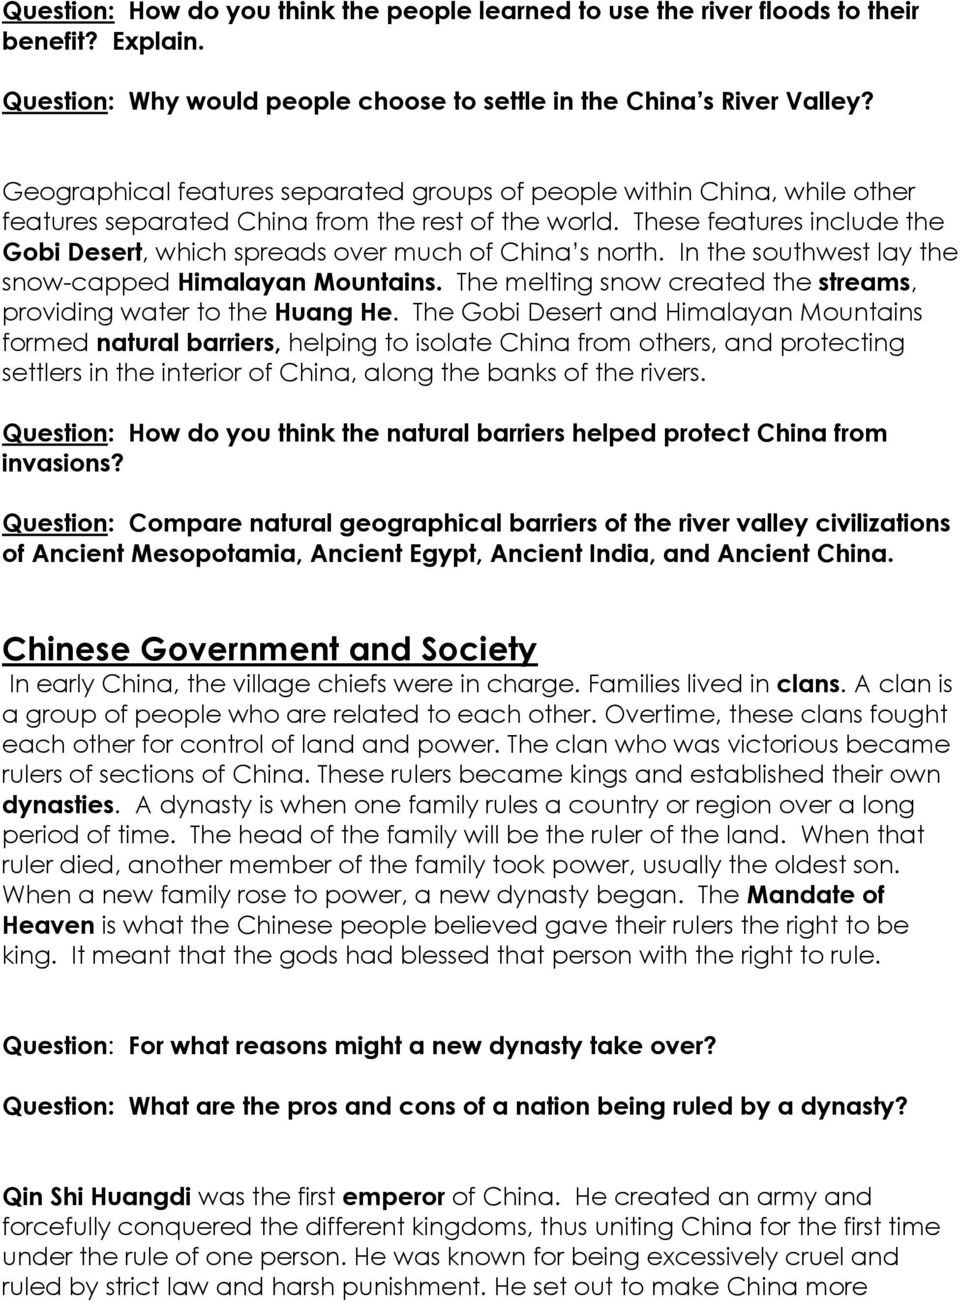 River Valley Civilizations Worksheet Answers Ancient River Valley Civilizations China Pdf Free Download